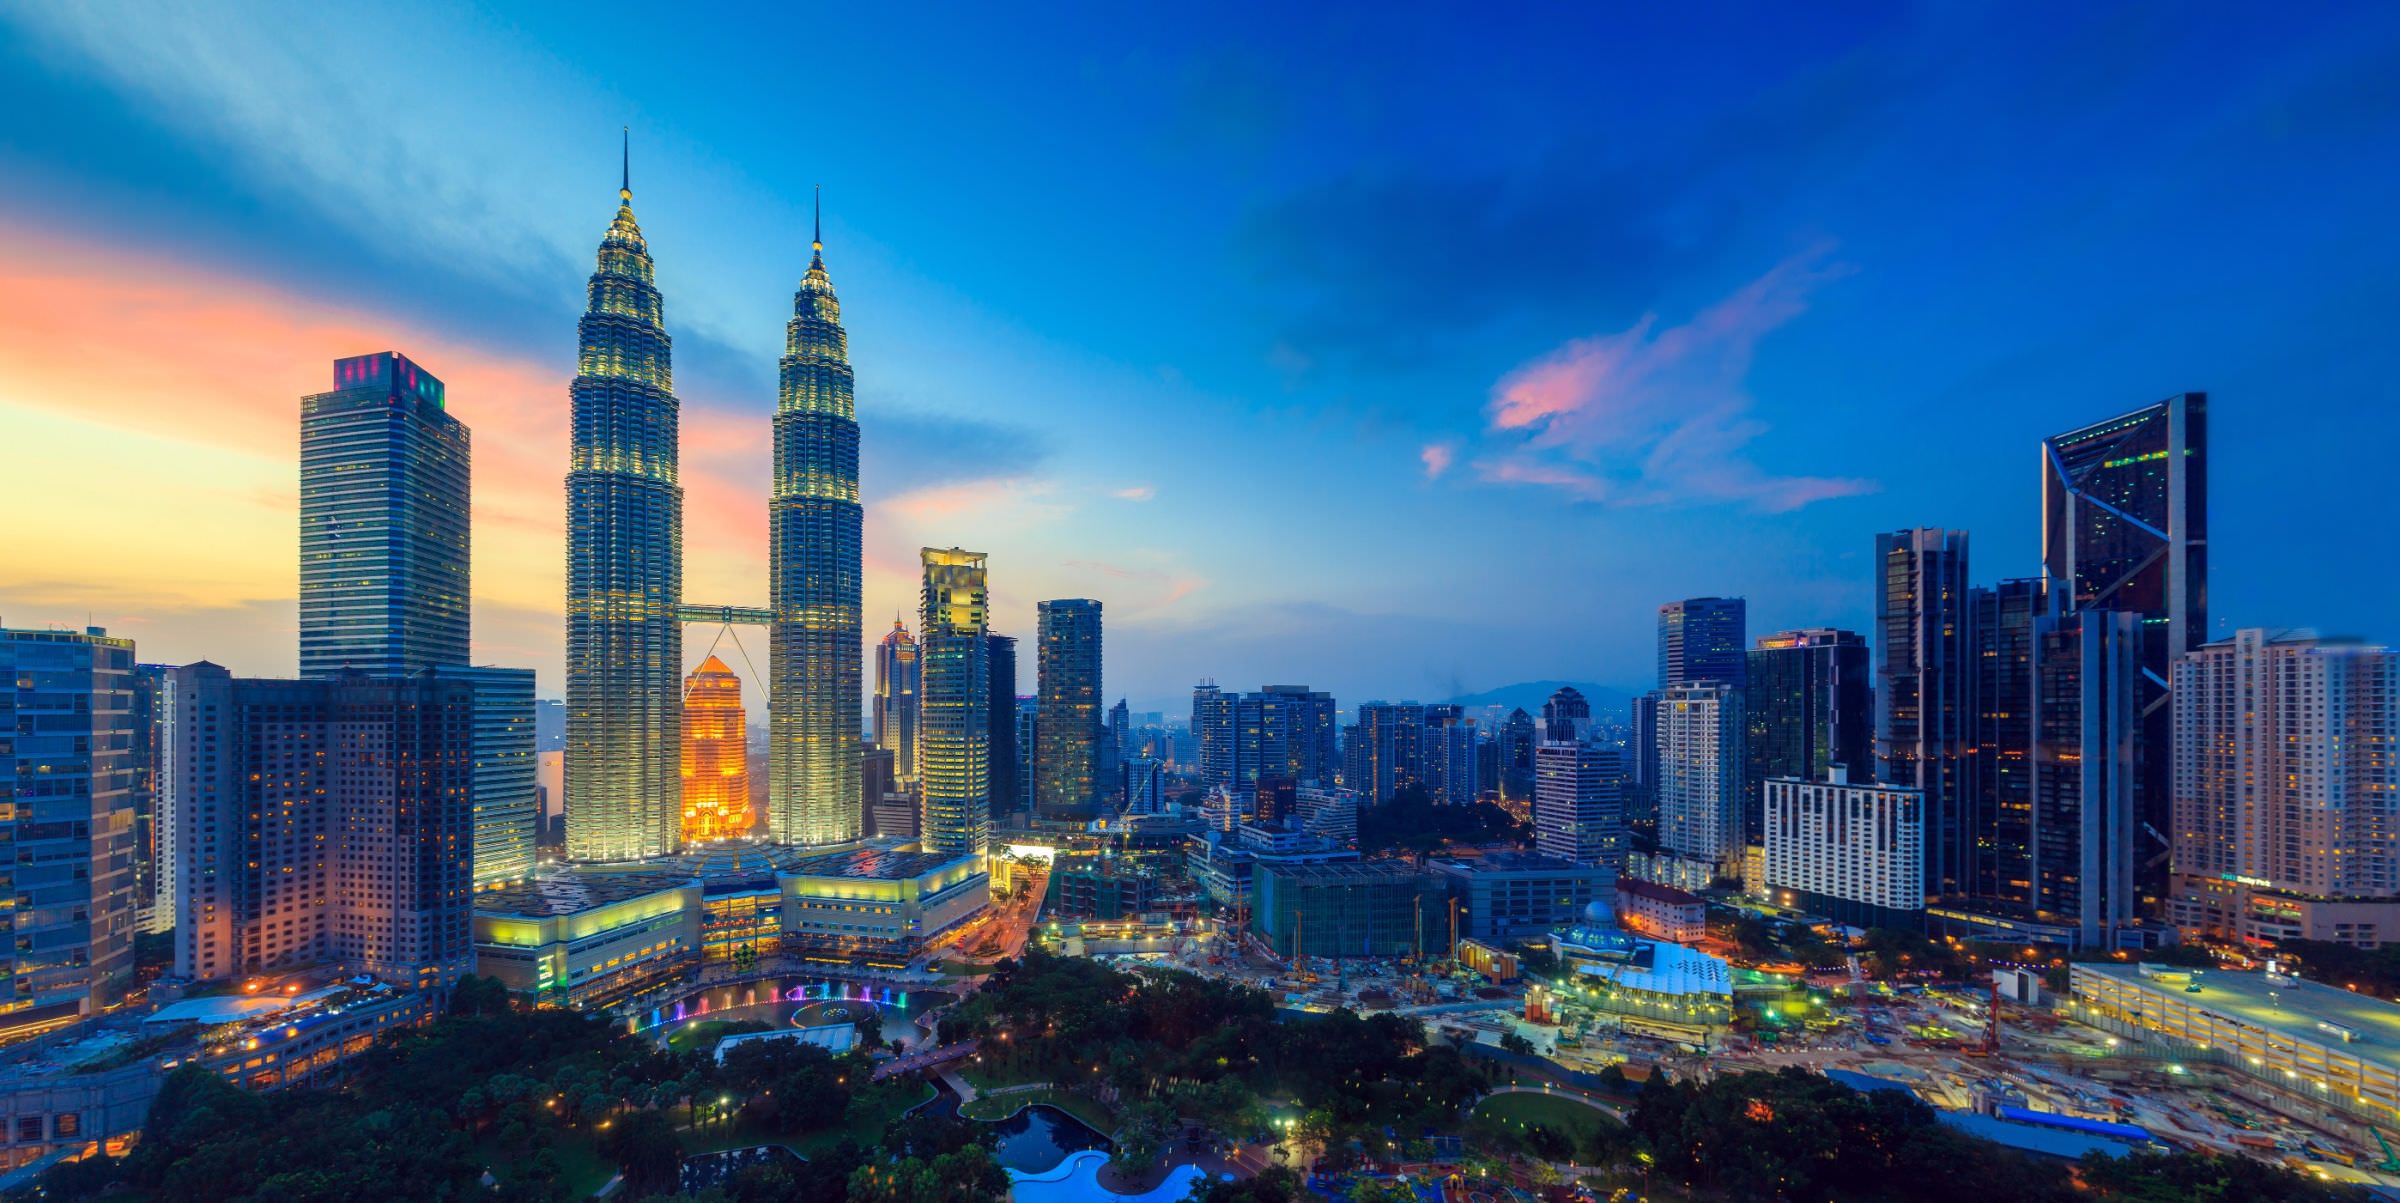 The best ever luxurious Singapore + Malaysia itinerary for 12 nights